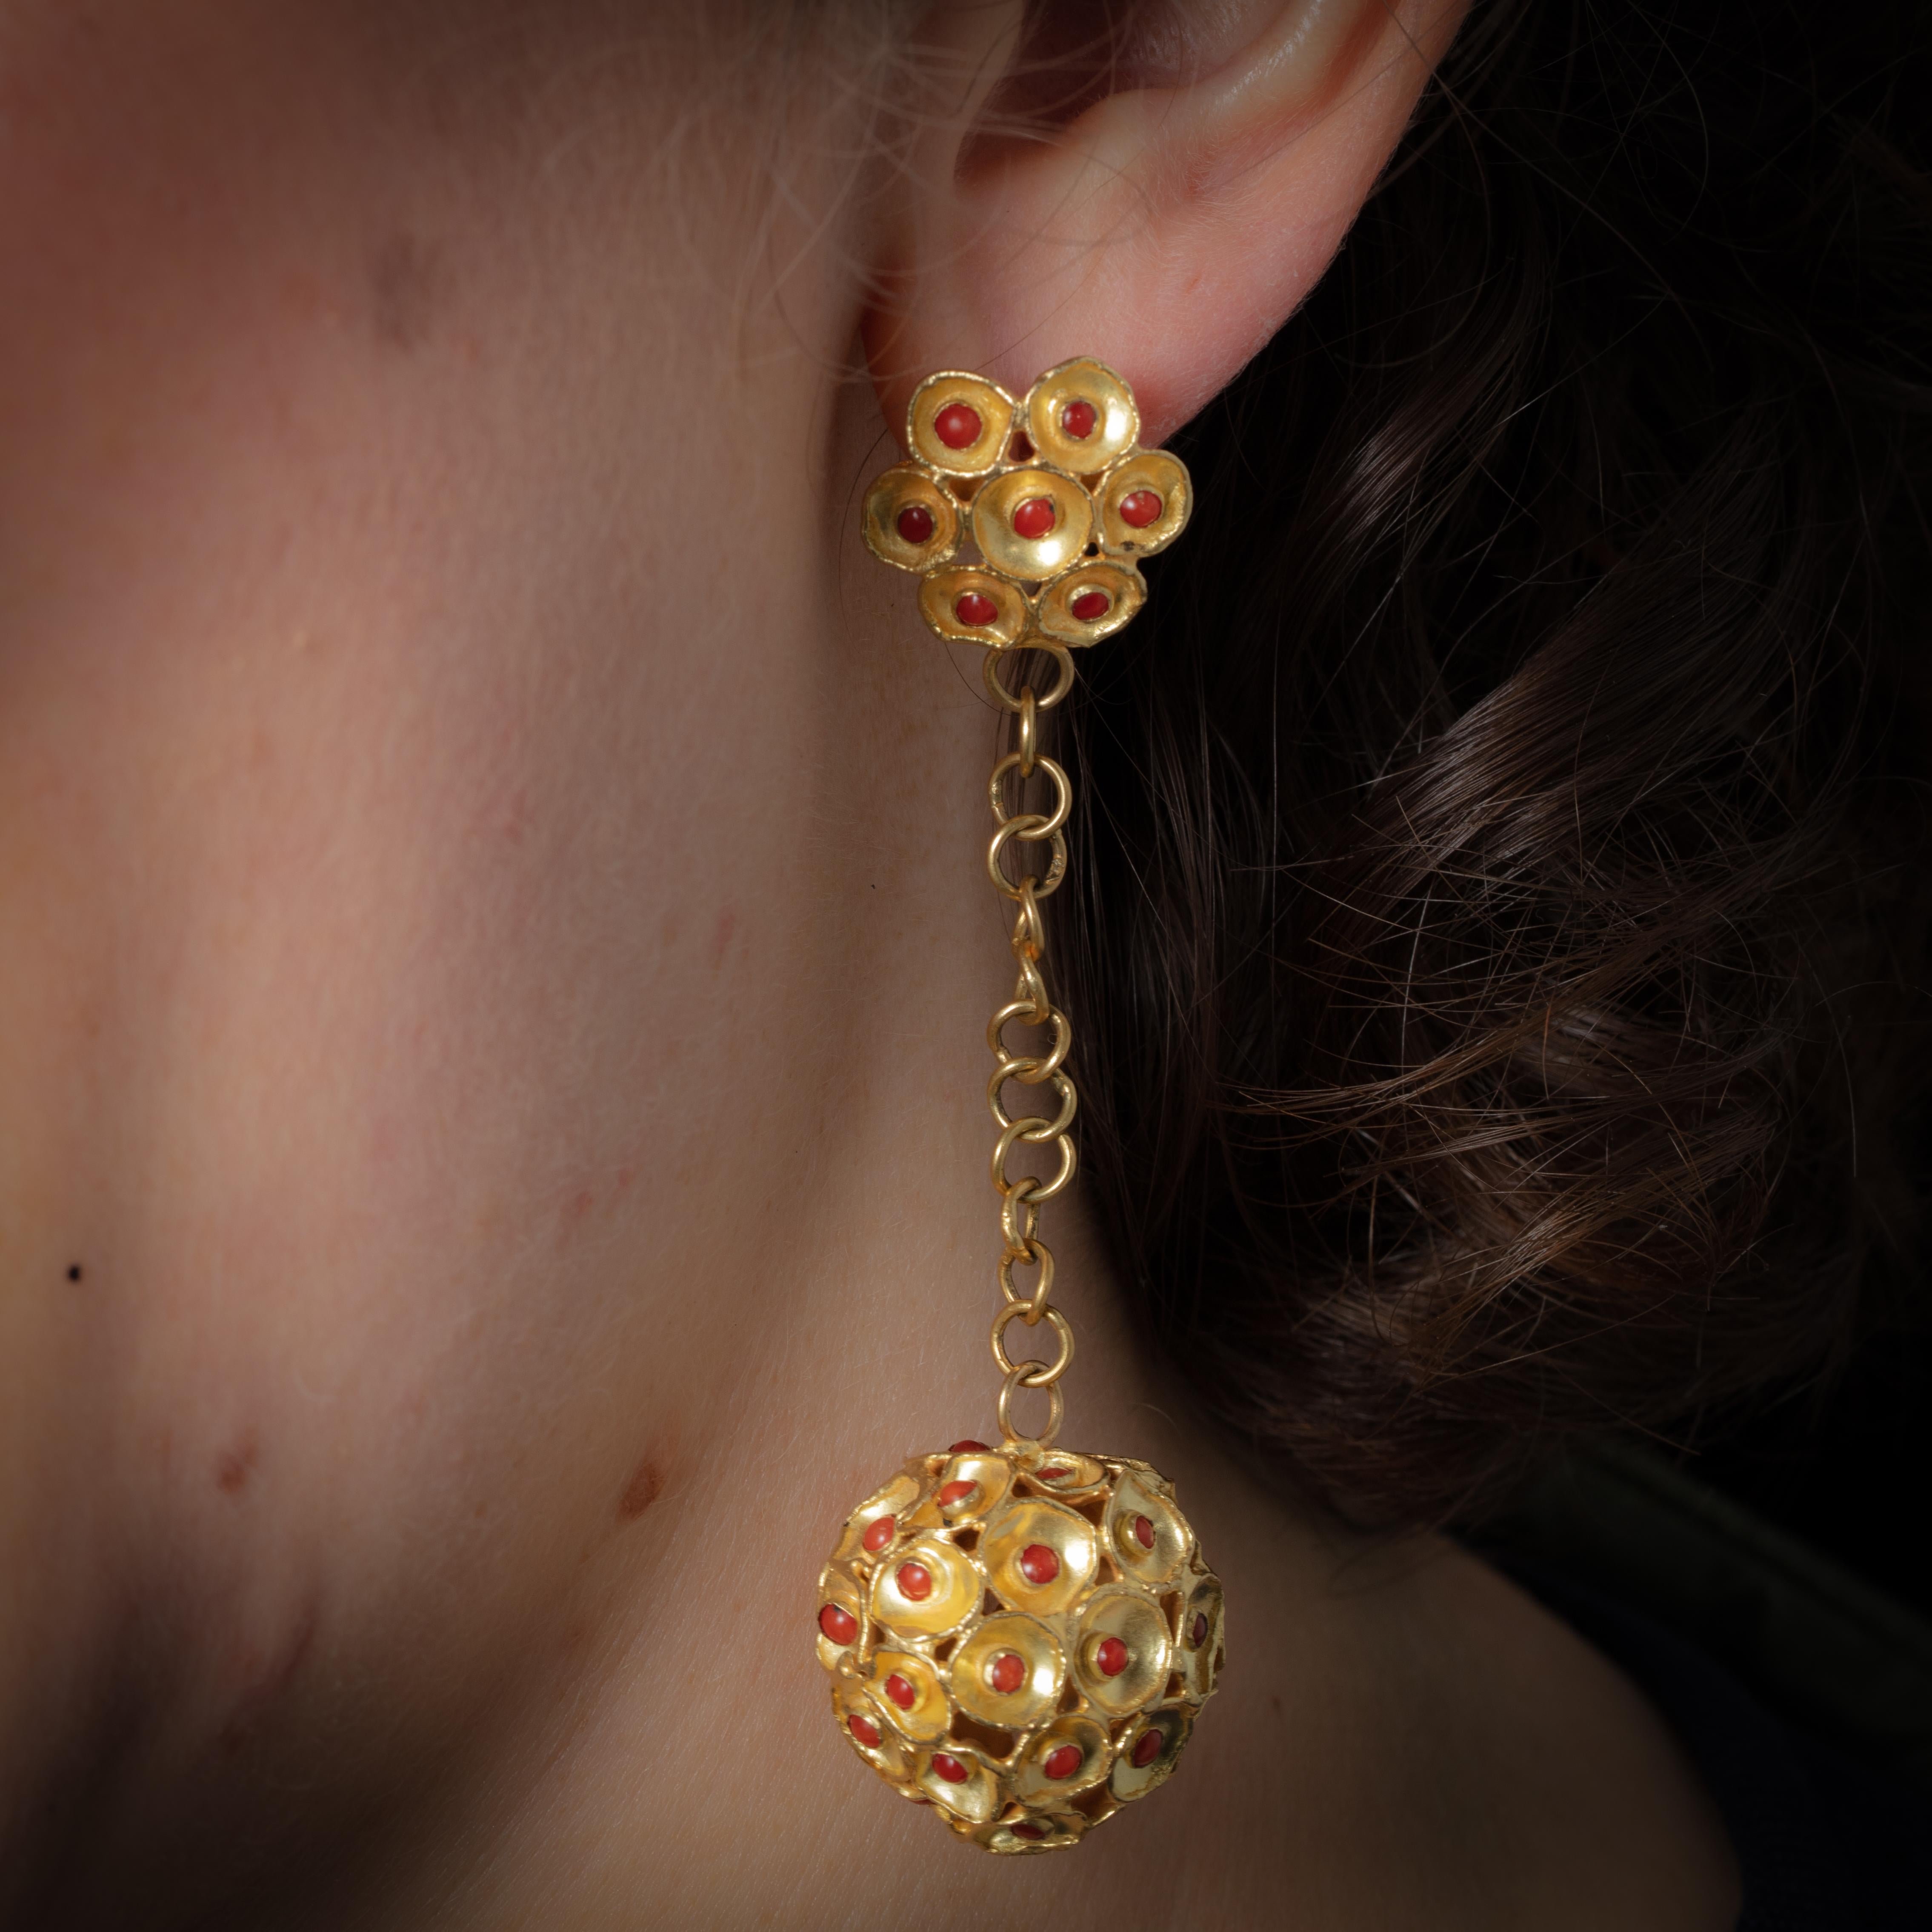 An astounding pair of 22K gold drop earrings with a flower motif post with coral and a textured gold and coral ball dropping from a 22K gold chain.  All hand-constructed.  For pierced ears.  Flower portion is 3/4 inch in diameter, the ball is 1